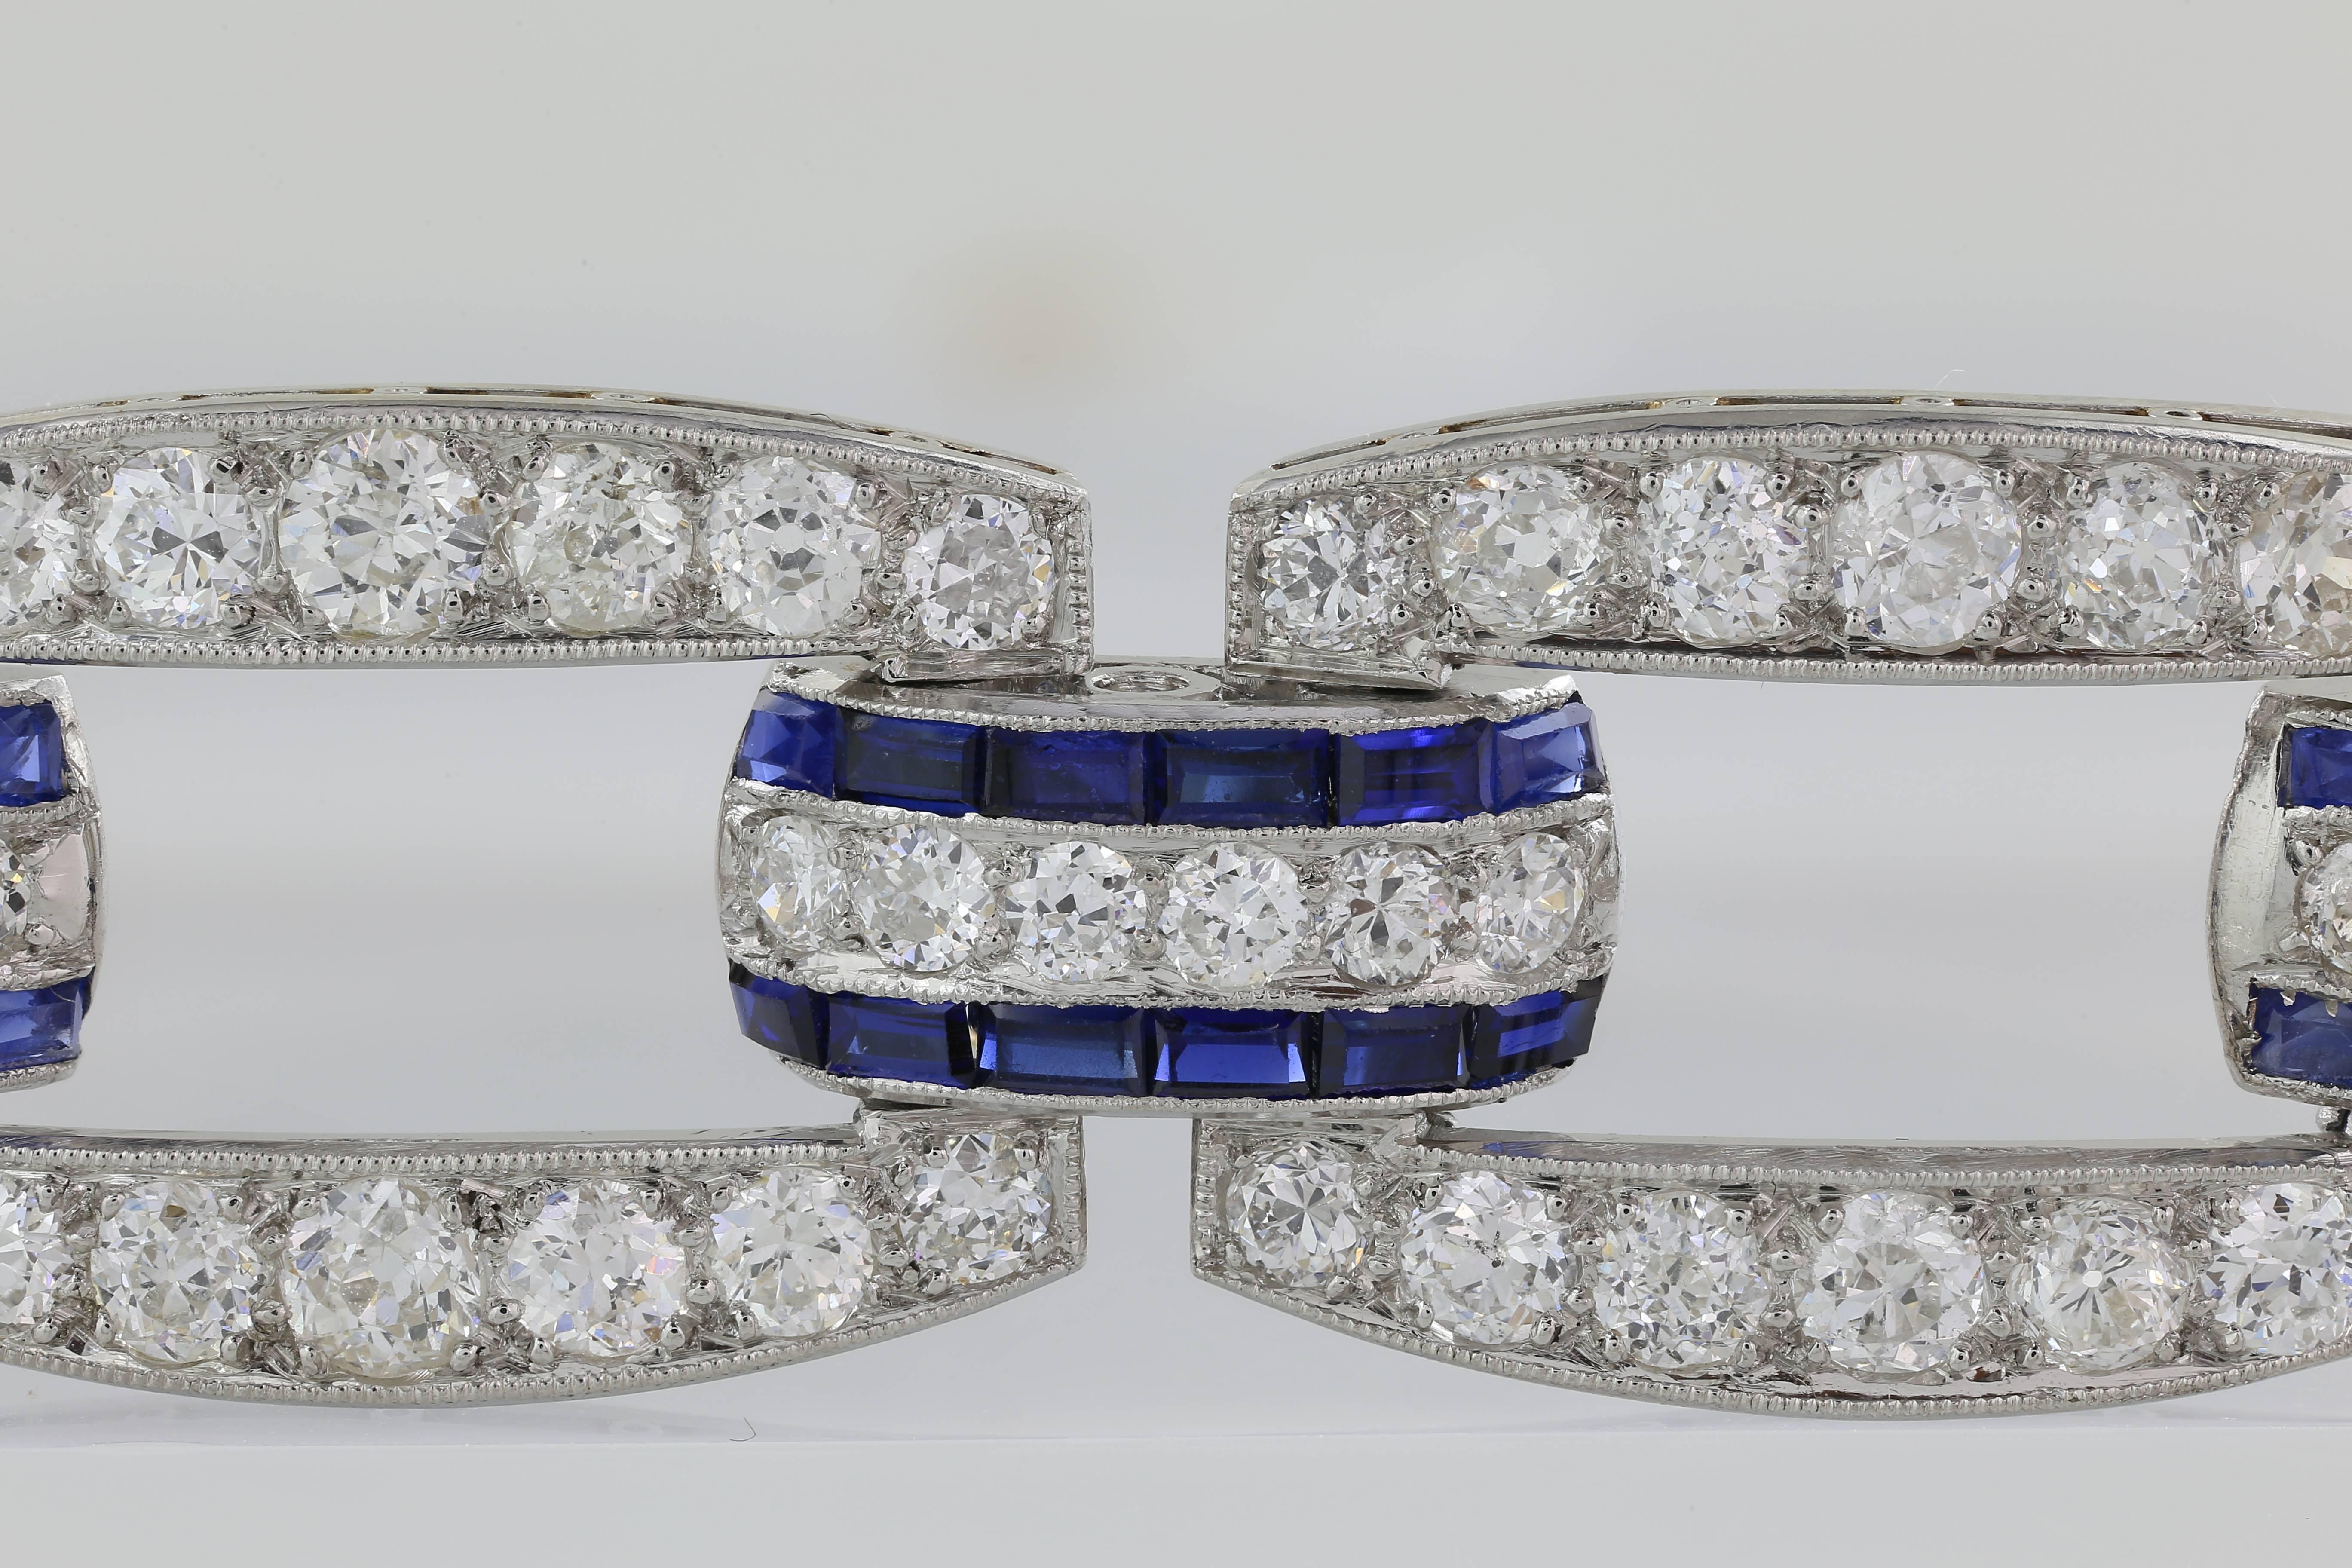 Platinum Art Deco Bracelet consisting of 160 old European cut diamonds having a total weight of approximately 12.50 carats set with 96 baguette cut sapphires having a total weight of approximately 3.00 carats, length is 7.5".